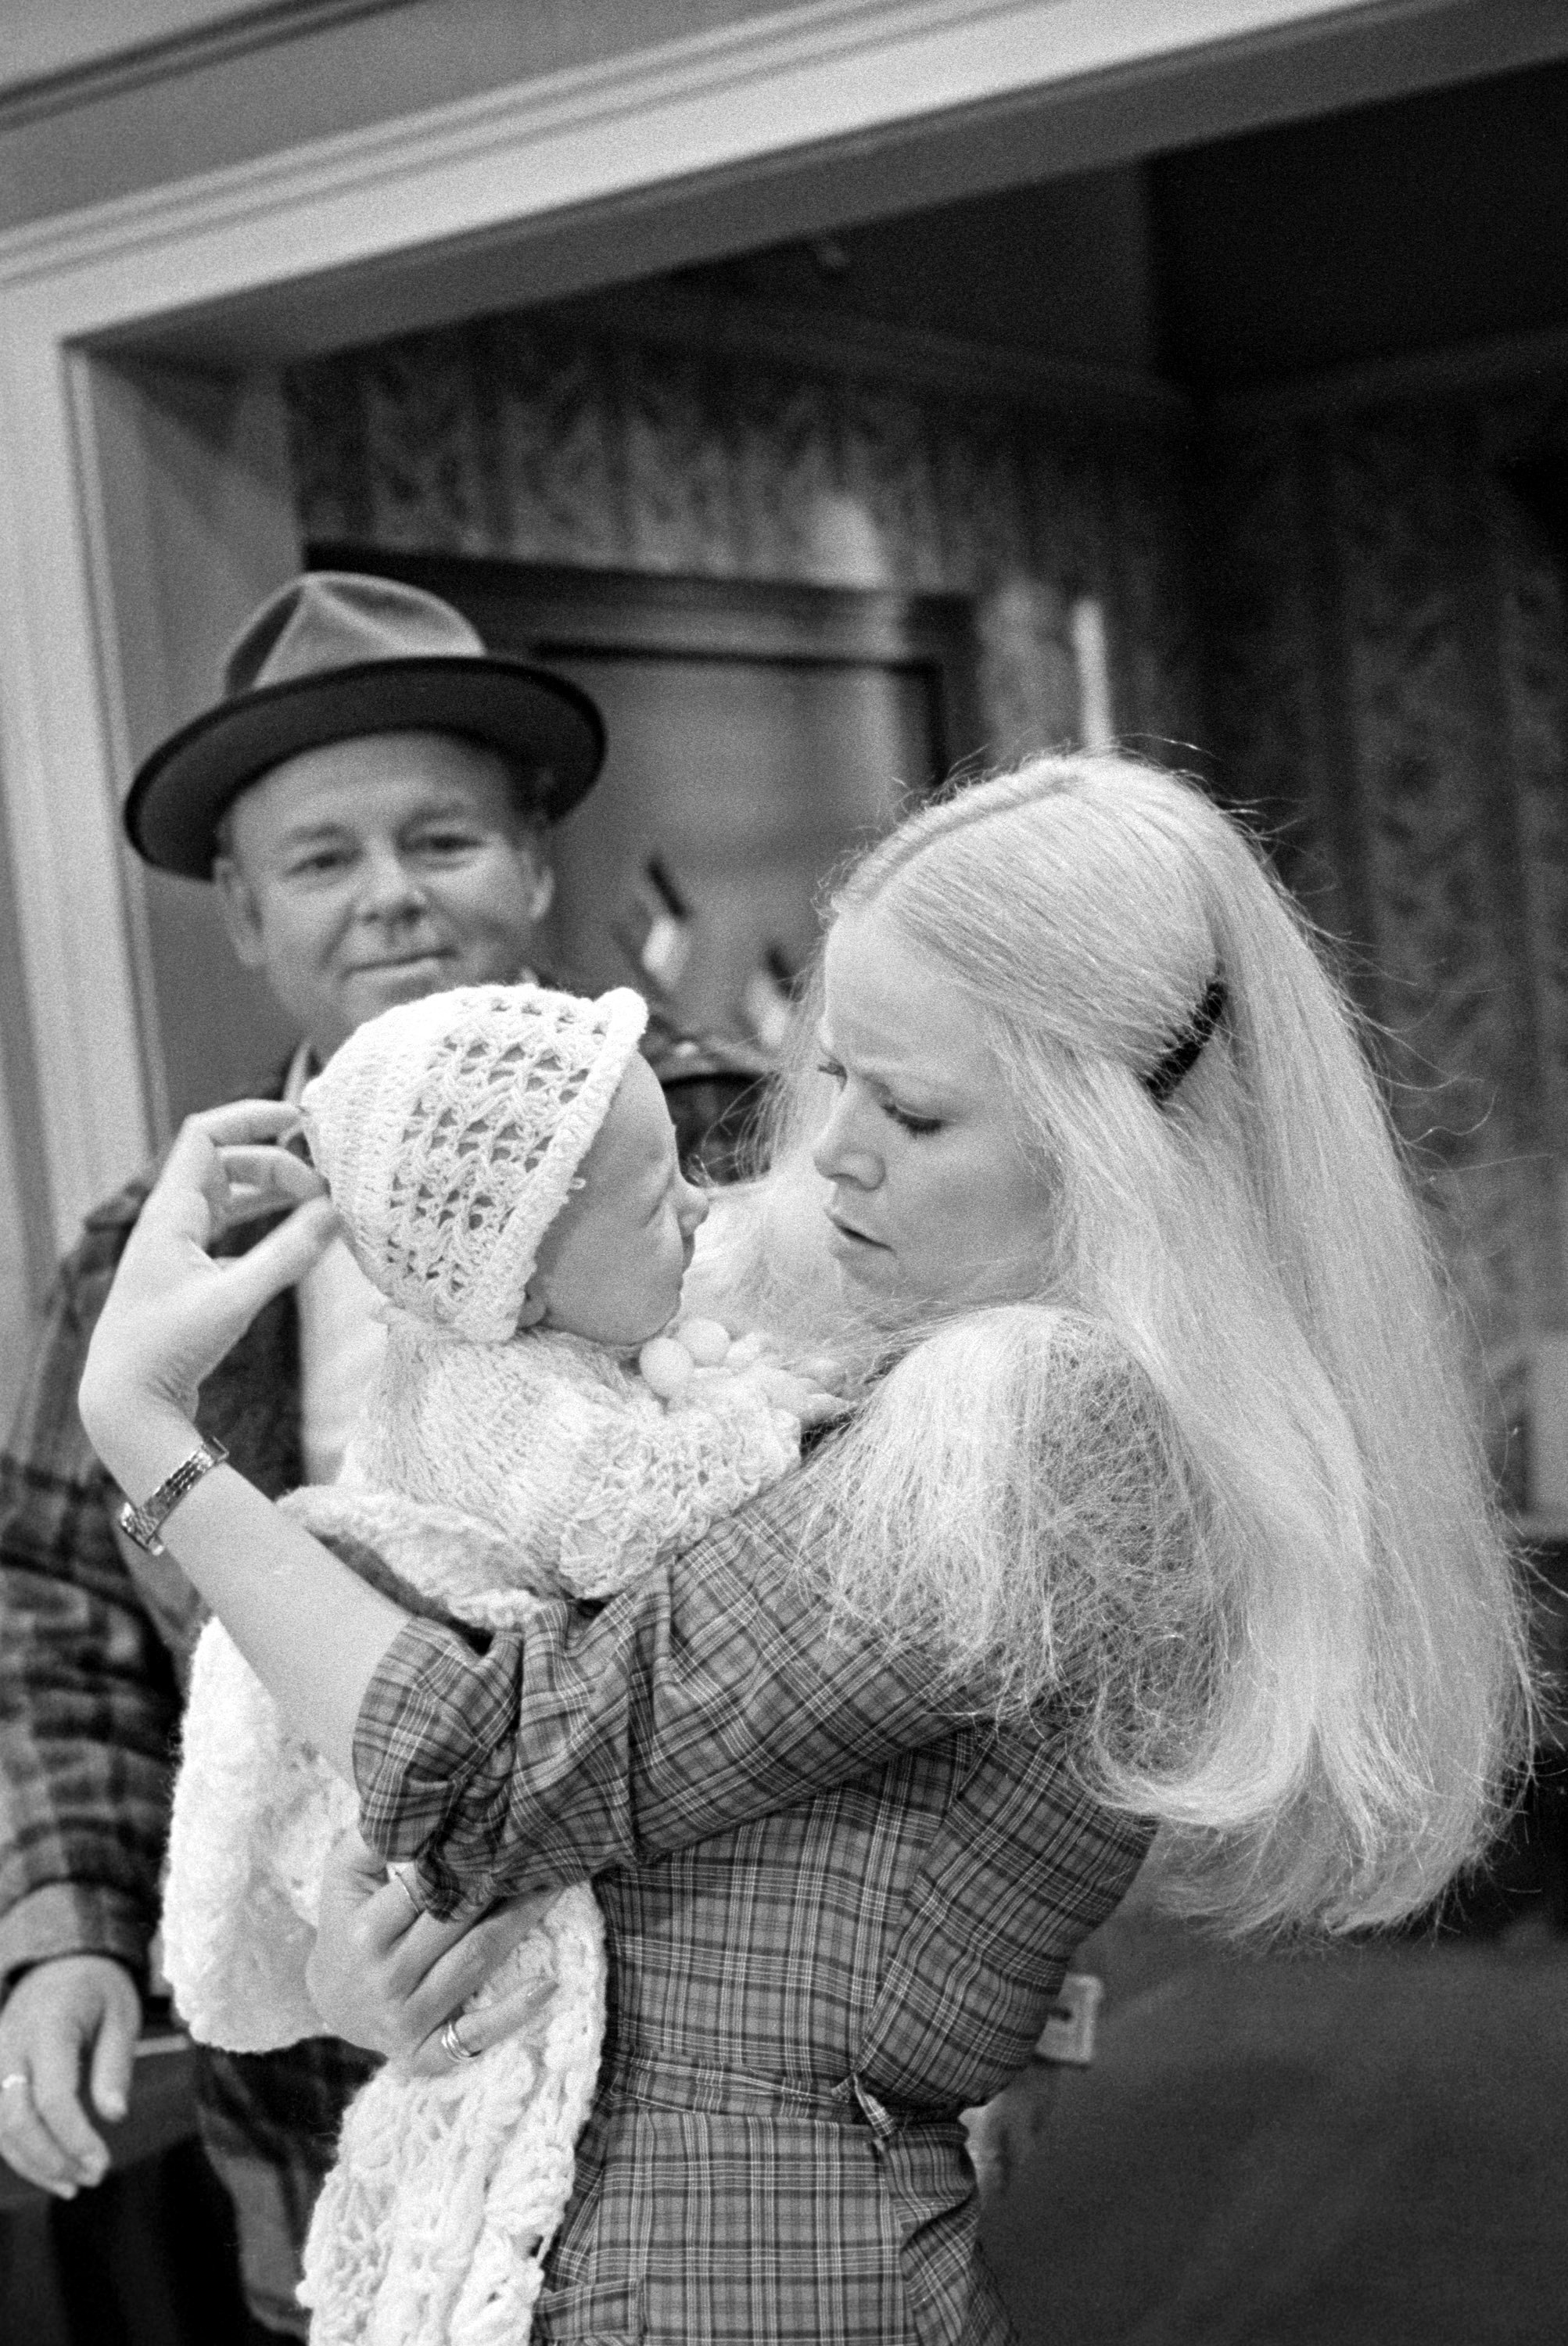 Carroll O'Connor (as Archie Bunker), Sally Struthers (as Gloria Bunker Stivic) and baby as "Joey Stivic" are shown in the "Mike's Move" episode of "All In The Family" on January 16, 1976 | Source: Getty Images